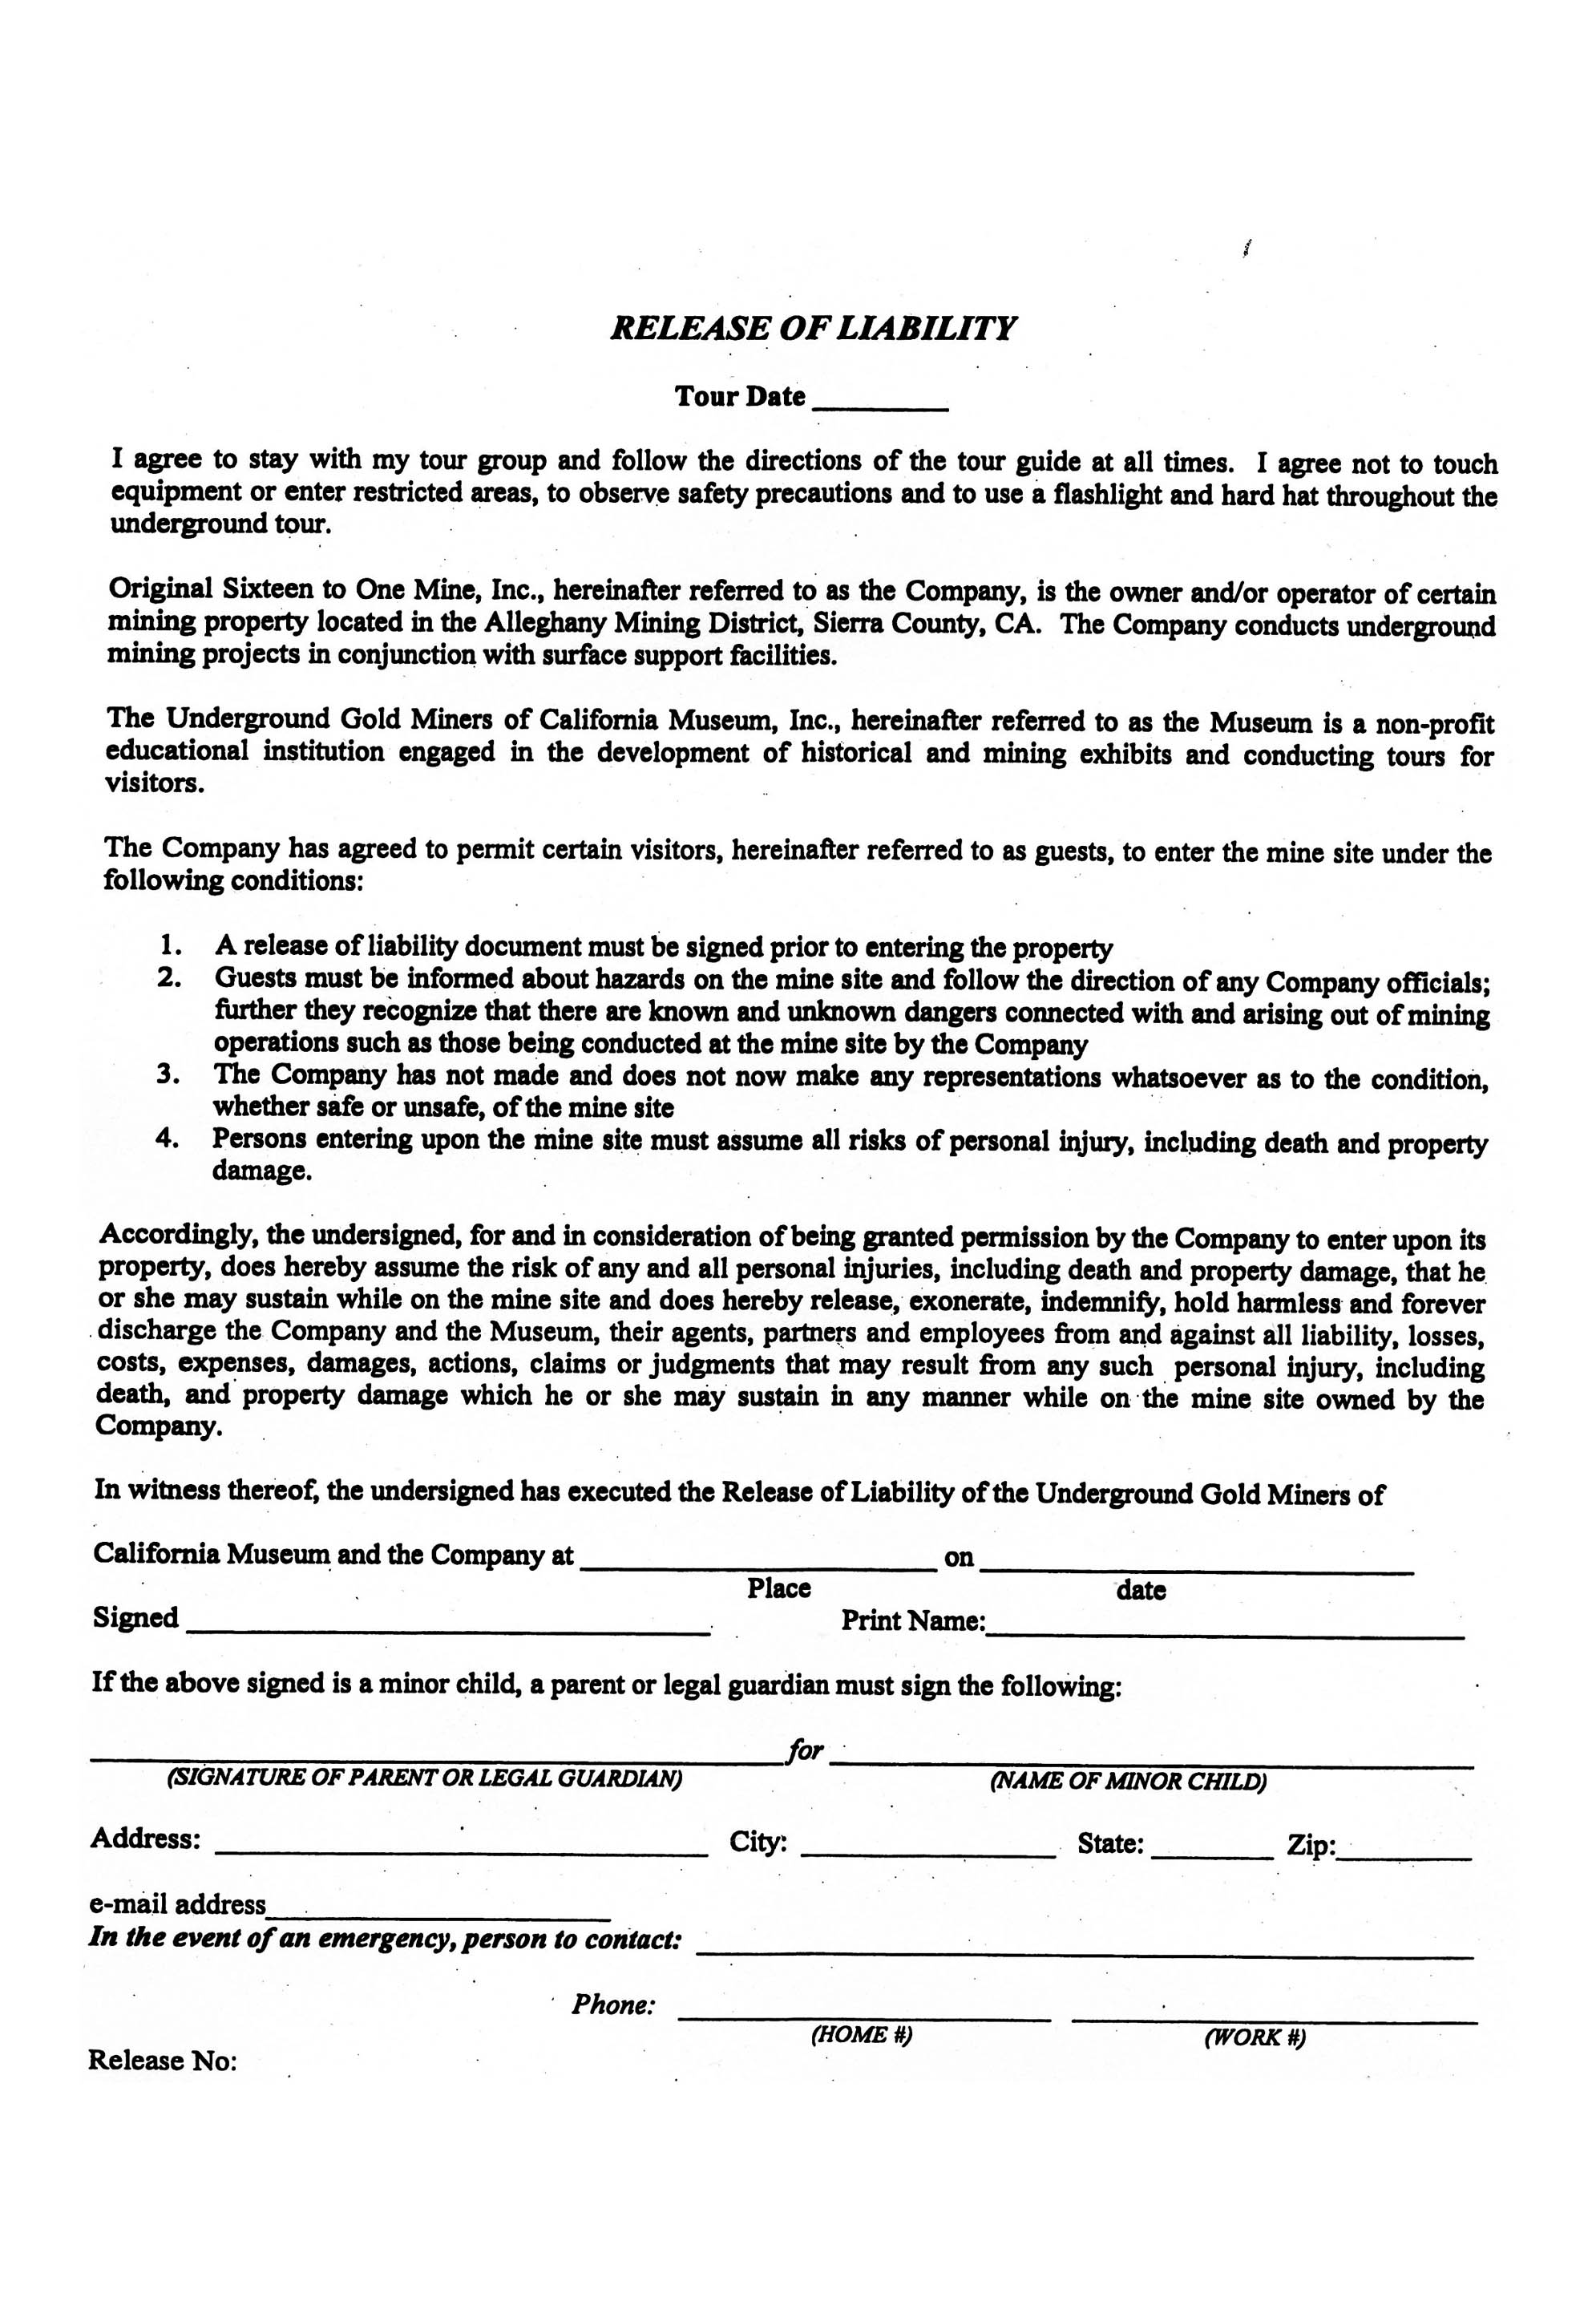 Liability Disclaimer Template Free Printable Documents